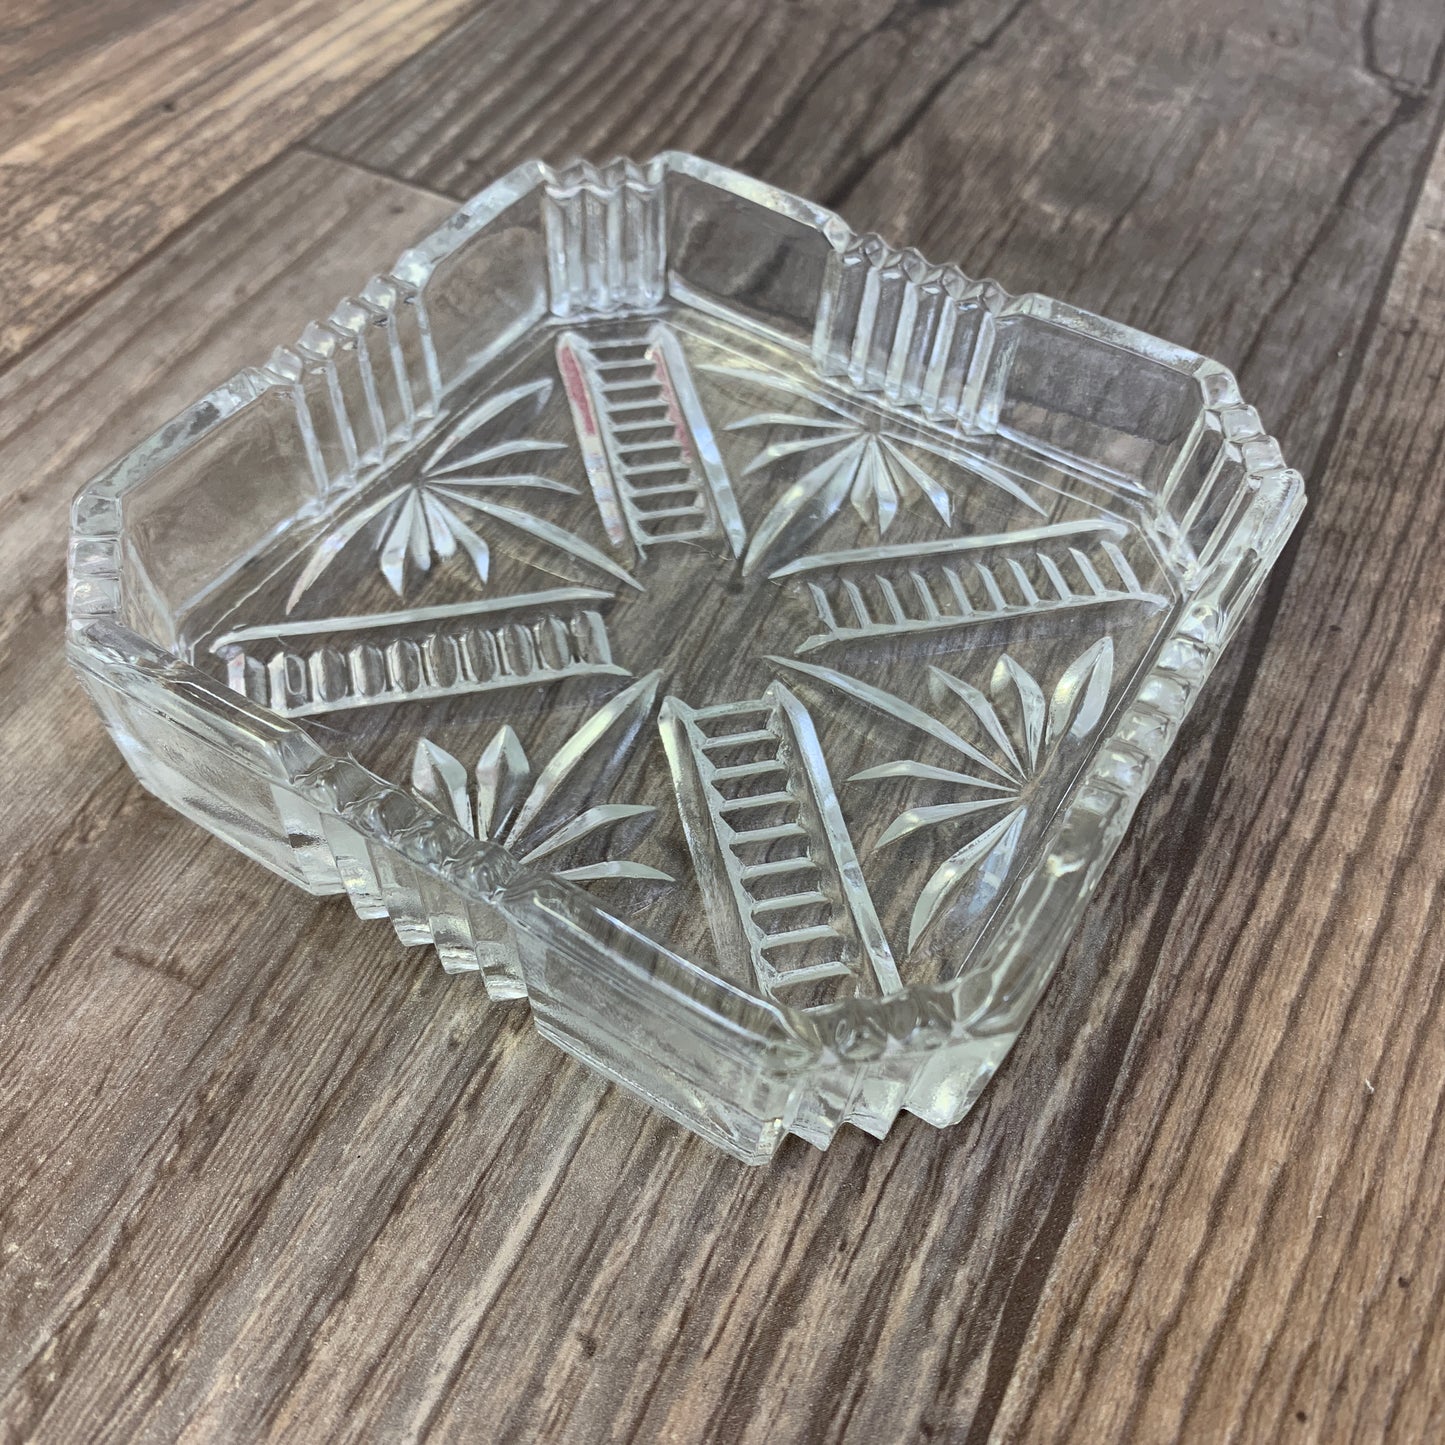 Small Pressed Glass Dish with Metal Tray, Vintage Butter Dish, Elegant Tableware, Housewarming Gift